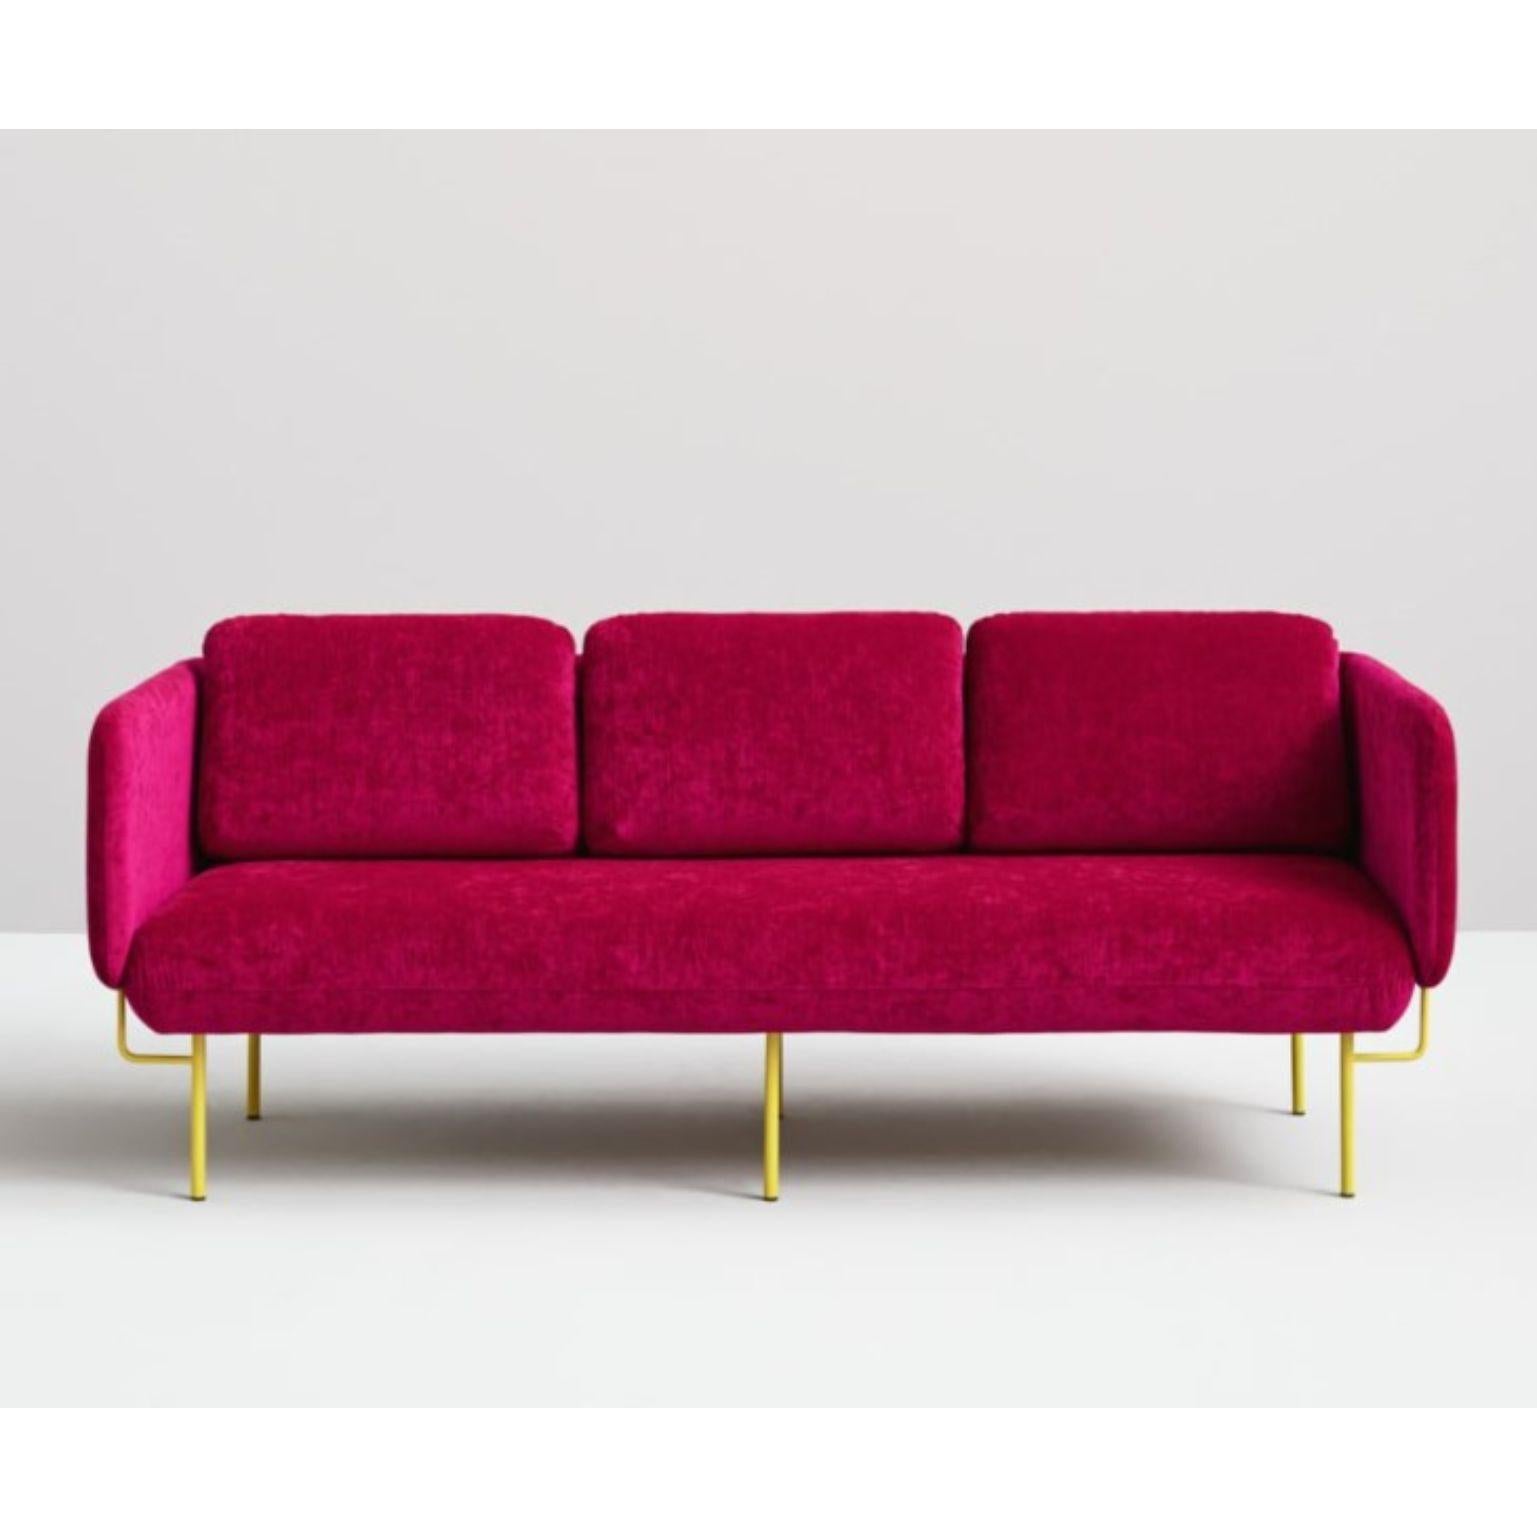 Pink Alce sofa, large by Pepe Albargues
Dimensions: W200, D88, H82, Seat45 (3 Seaters)
Materials: Iron structure and MDF board
Painted or chromed legs
Foam CMHR (high resilience and flame retardant) for all our cushion filling